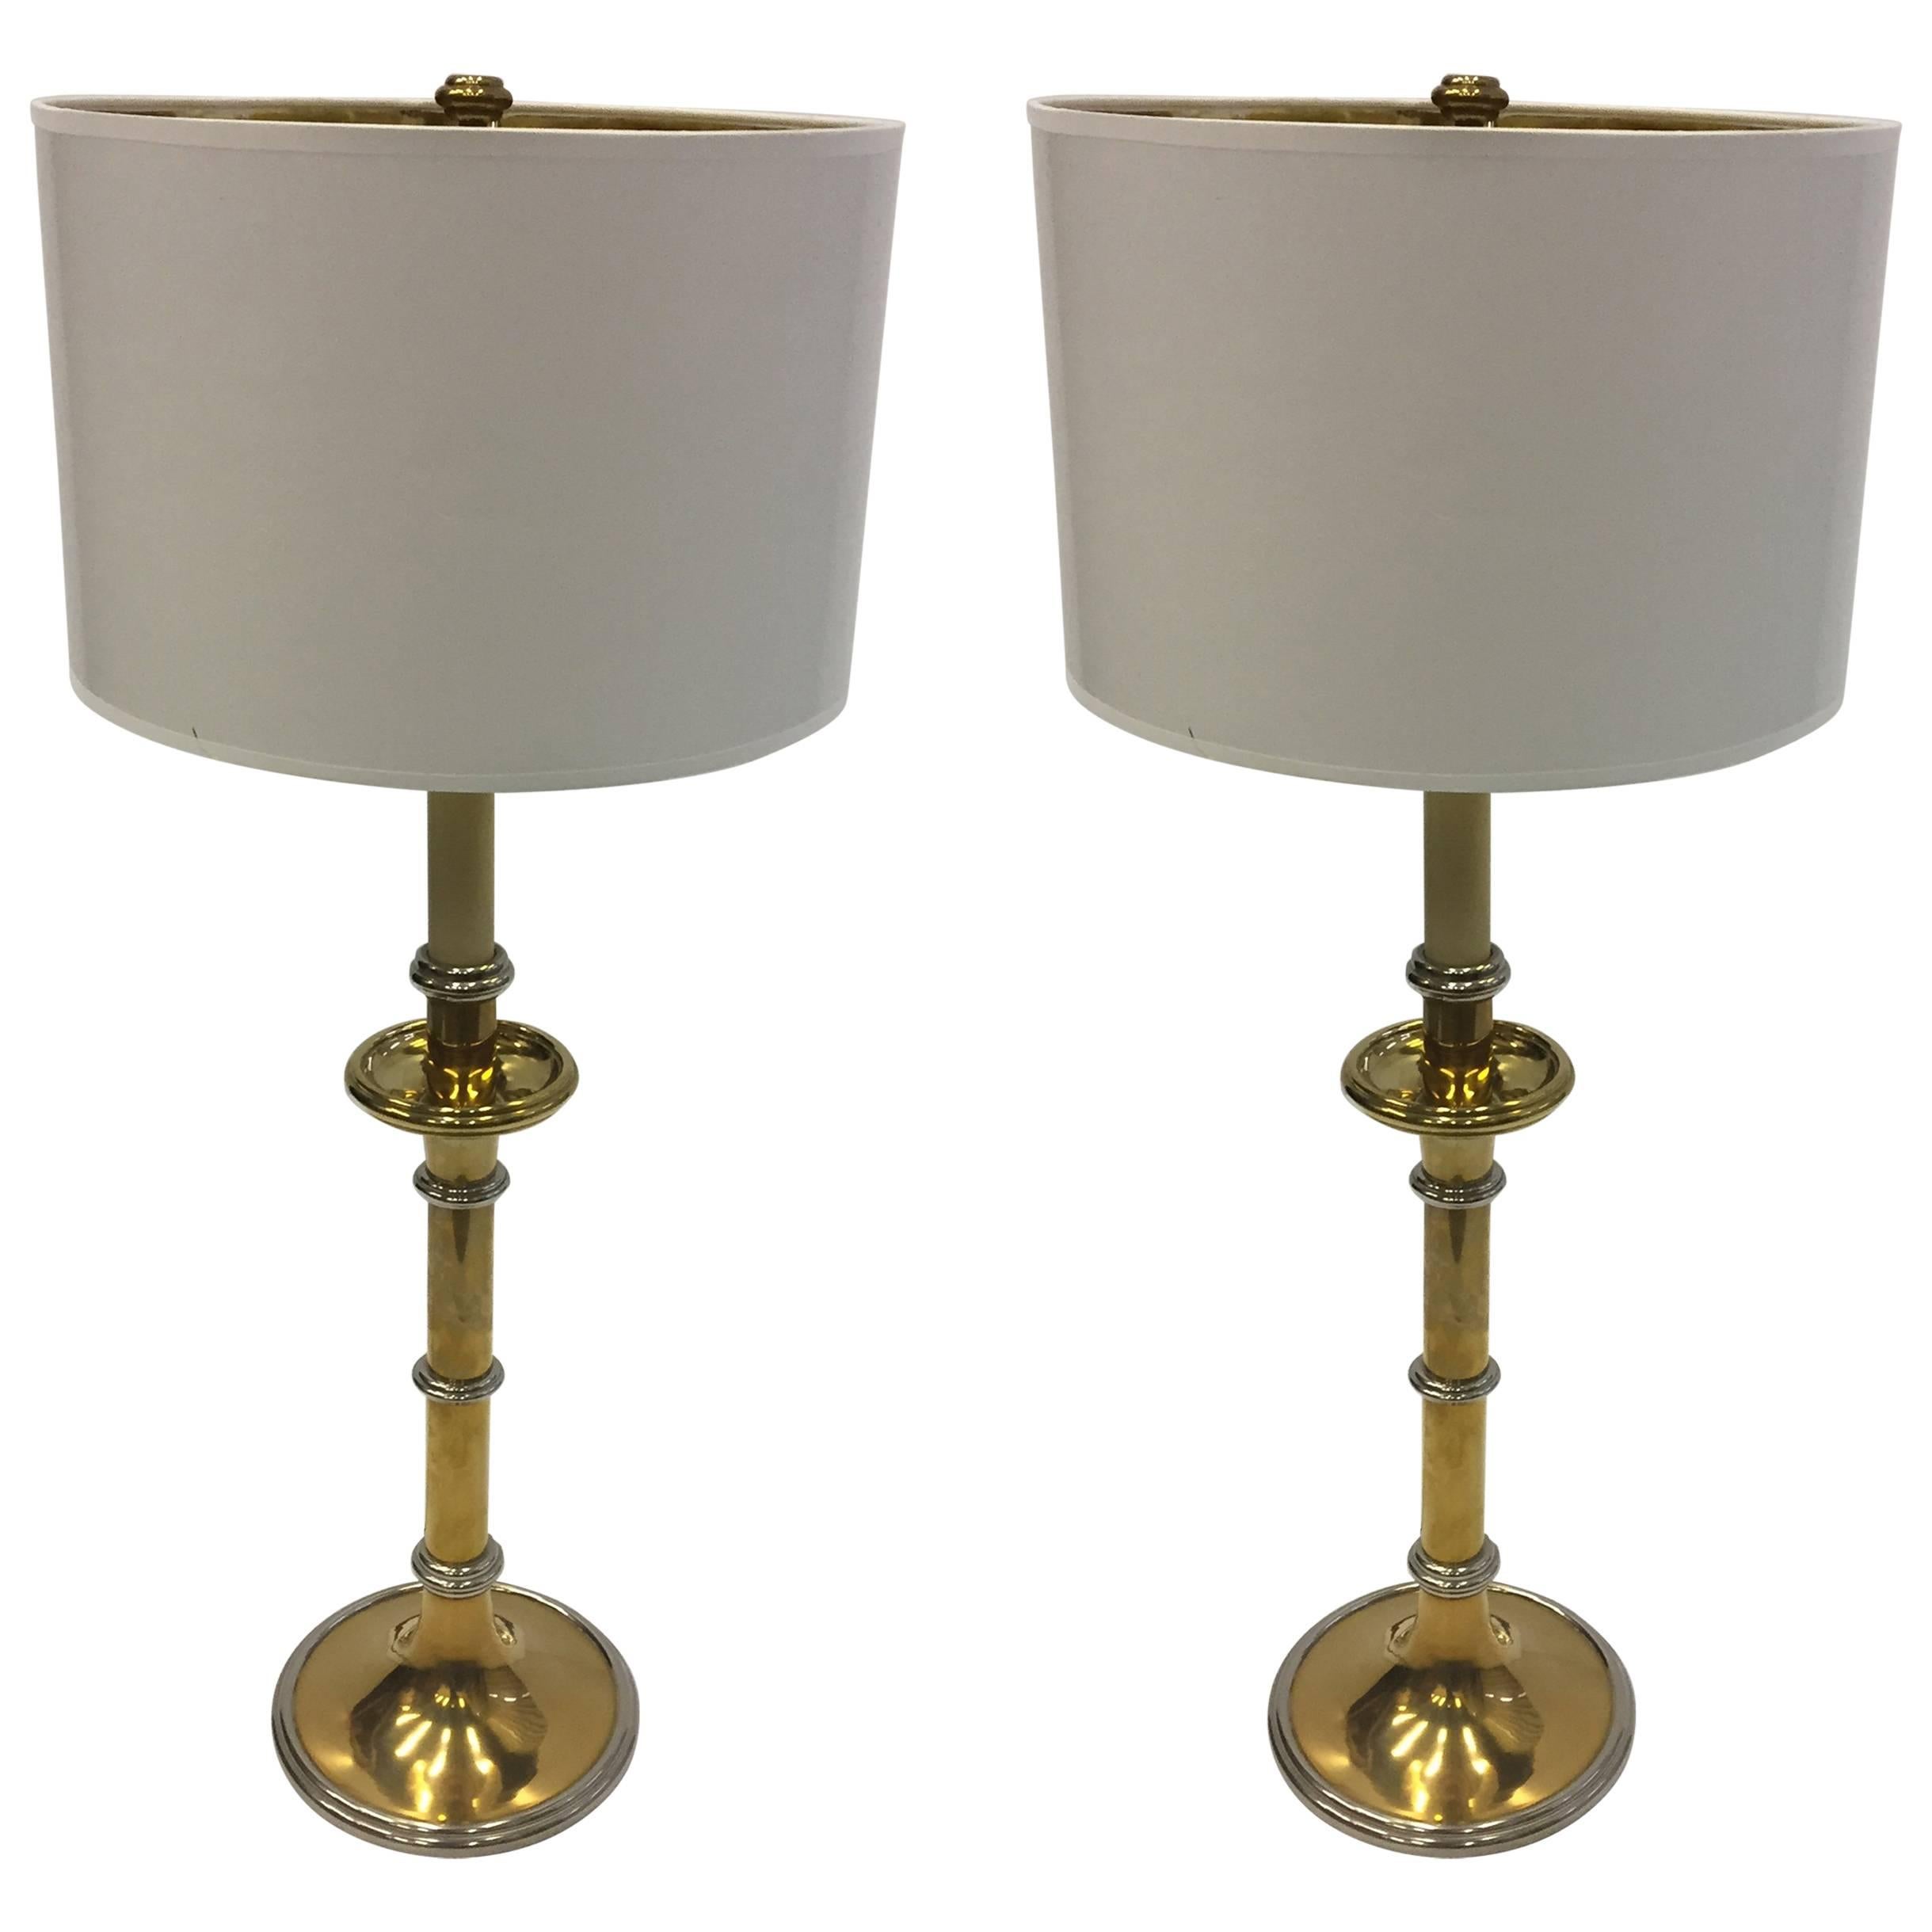 Pair of Elegant Brass and Chrome Table Lamps by Chapman